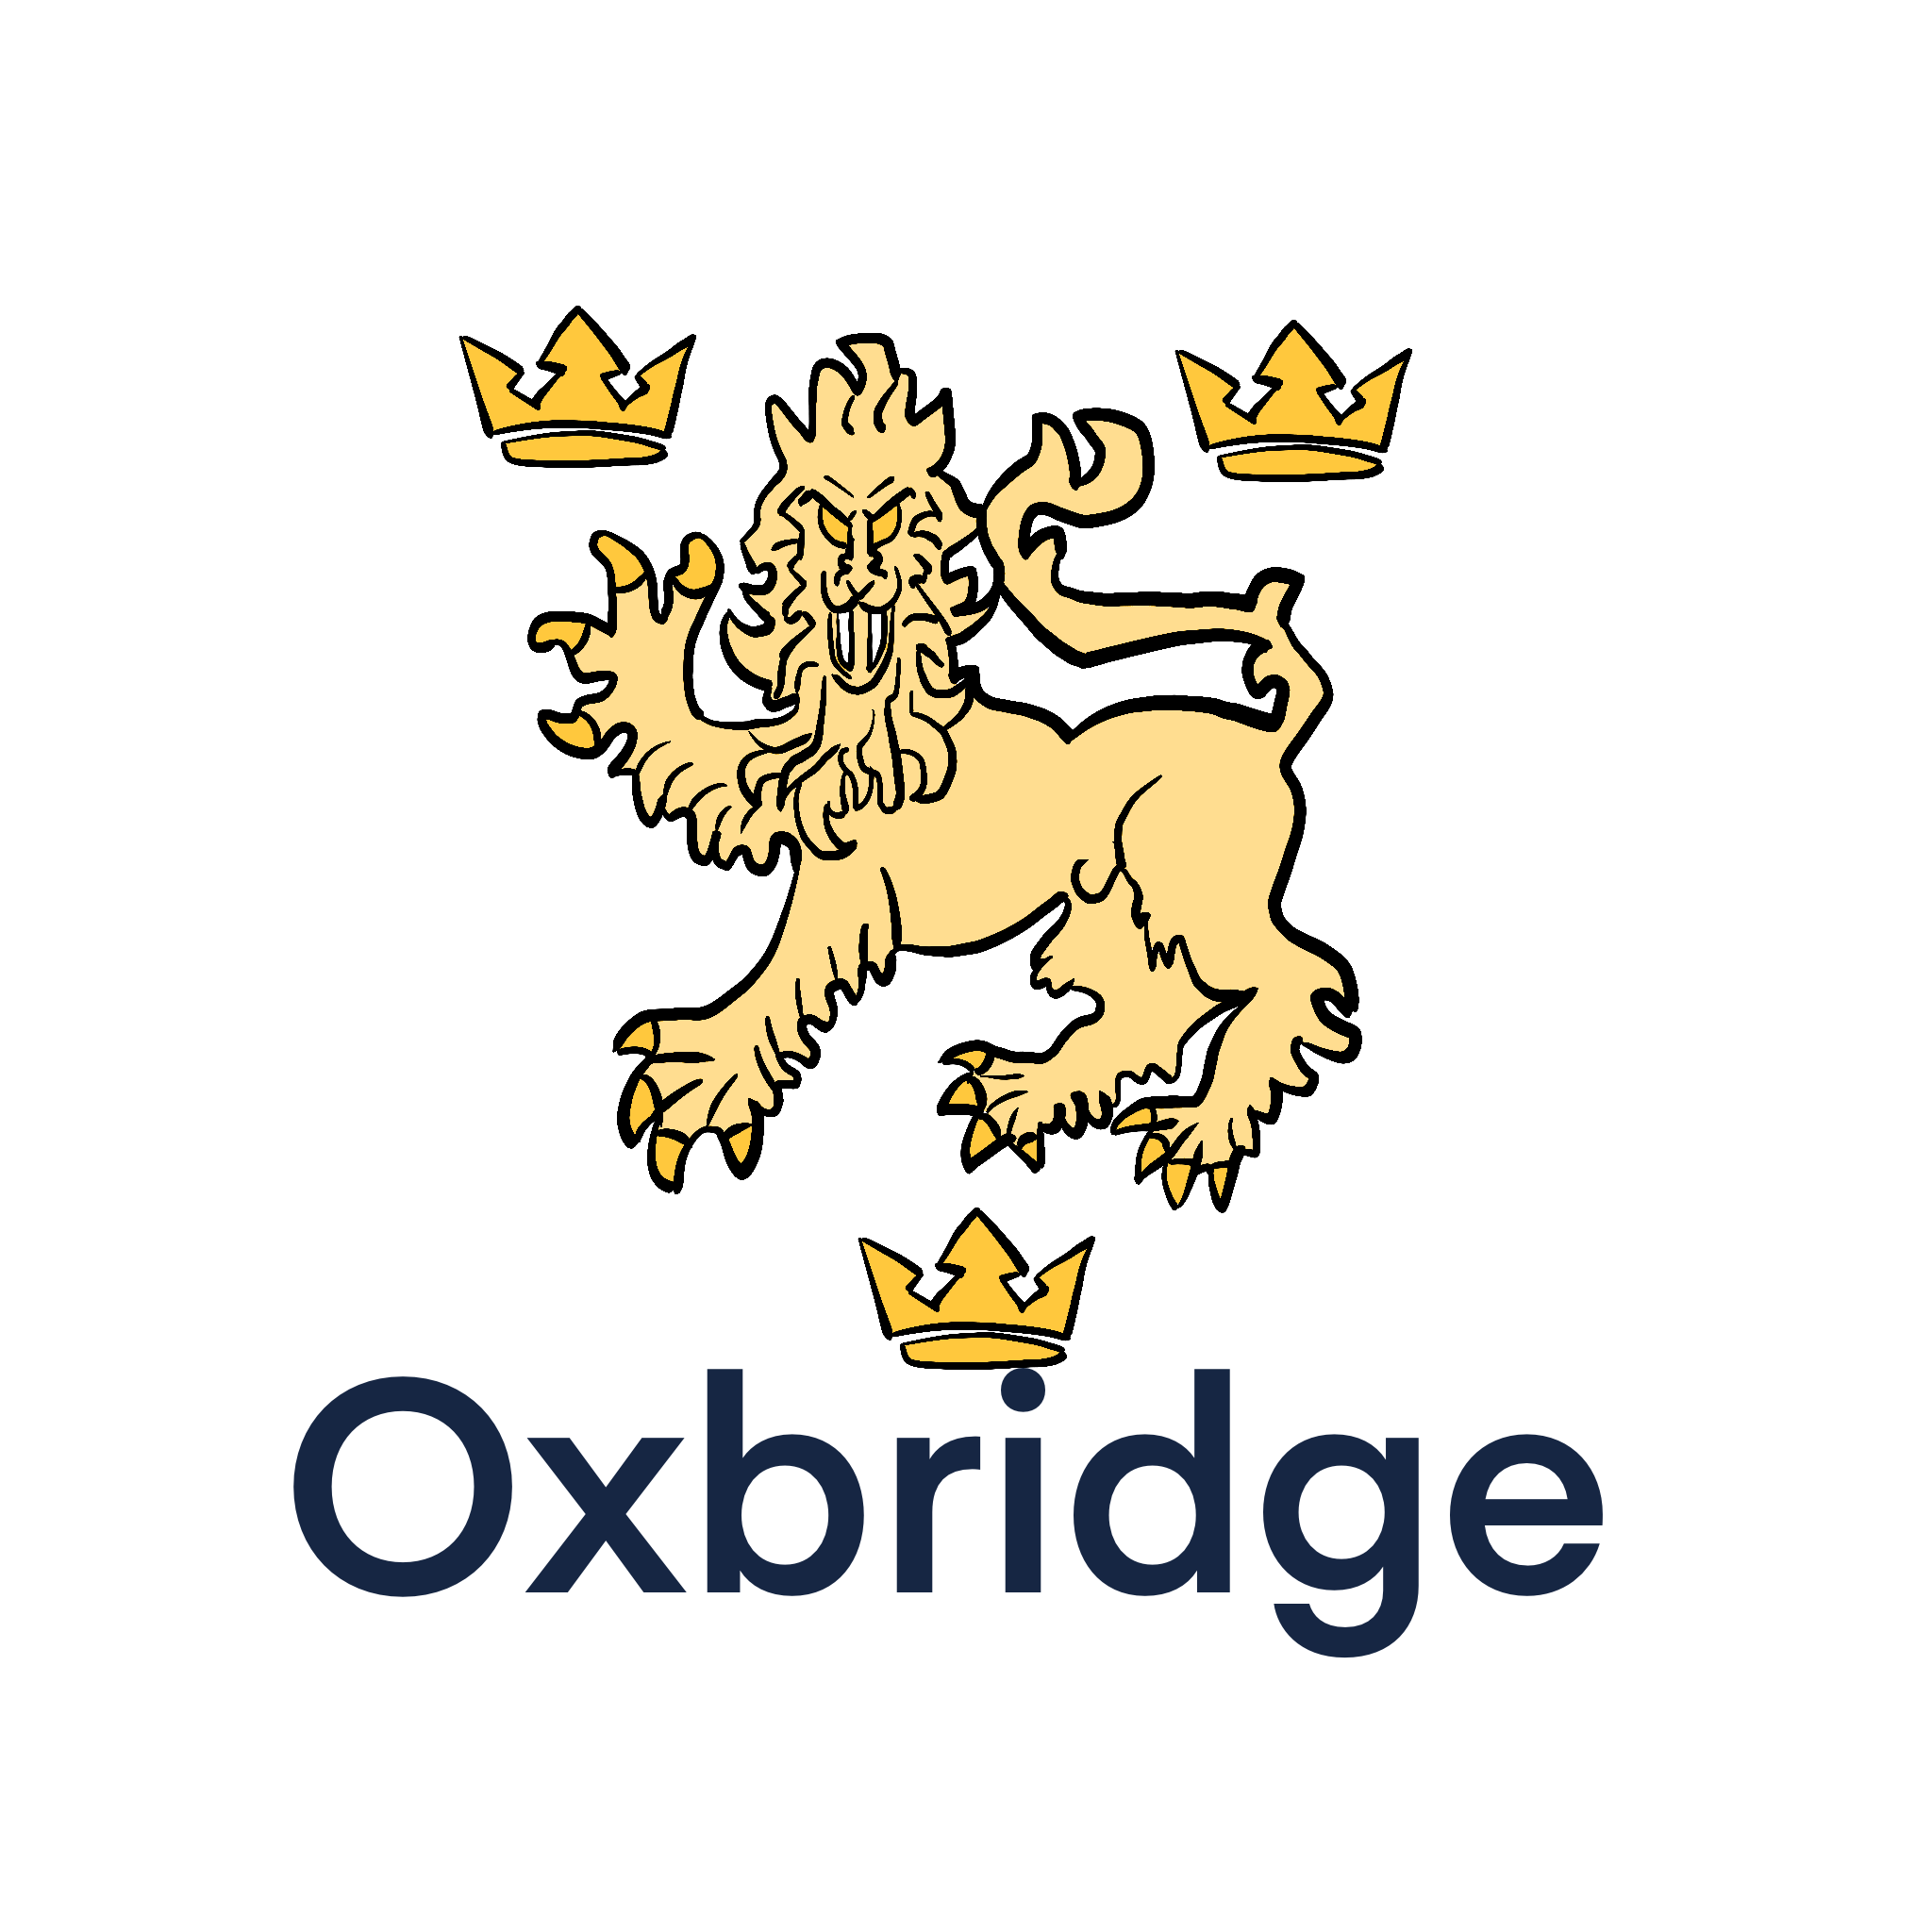 Adam holds a degree from Oxbridge